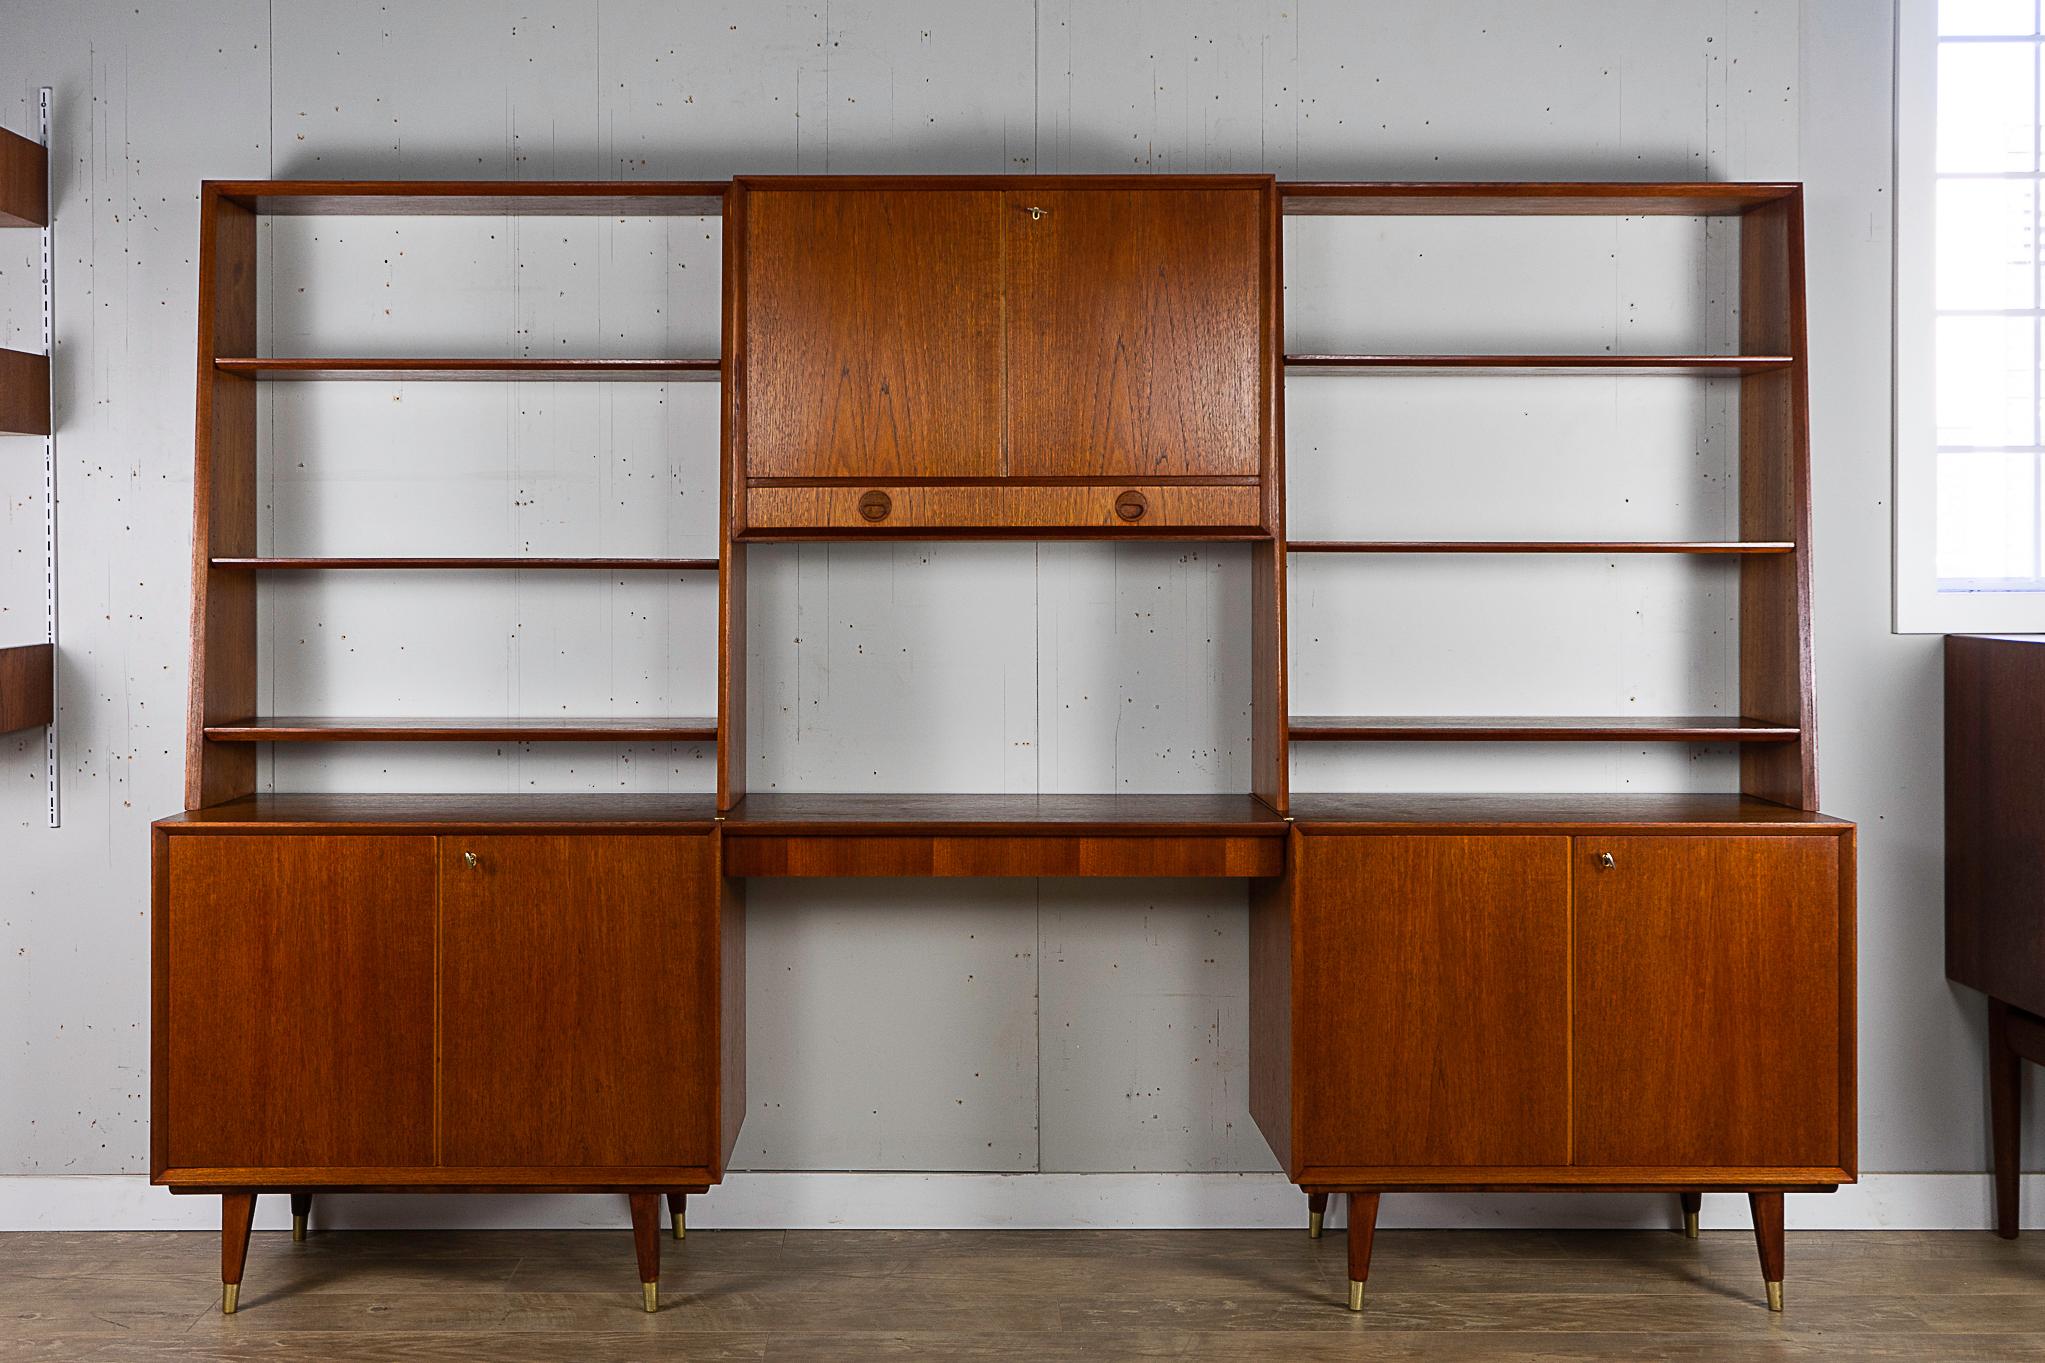 Teak Scandinavian wall cabinet circa 1960's. Smart storage solution, combining a drawered desk, open bookcases and three cabinets, all in one! Bookcase shelves are height adjustable, the center cabinet has an adjustable shelf as well, with a cut out